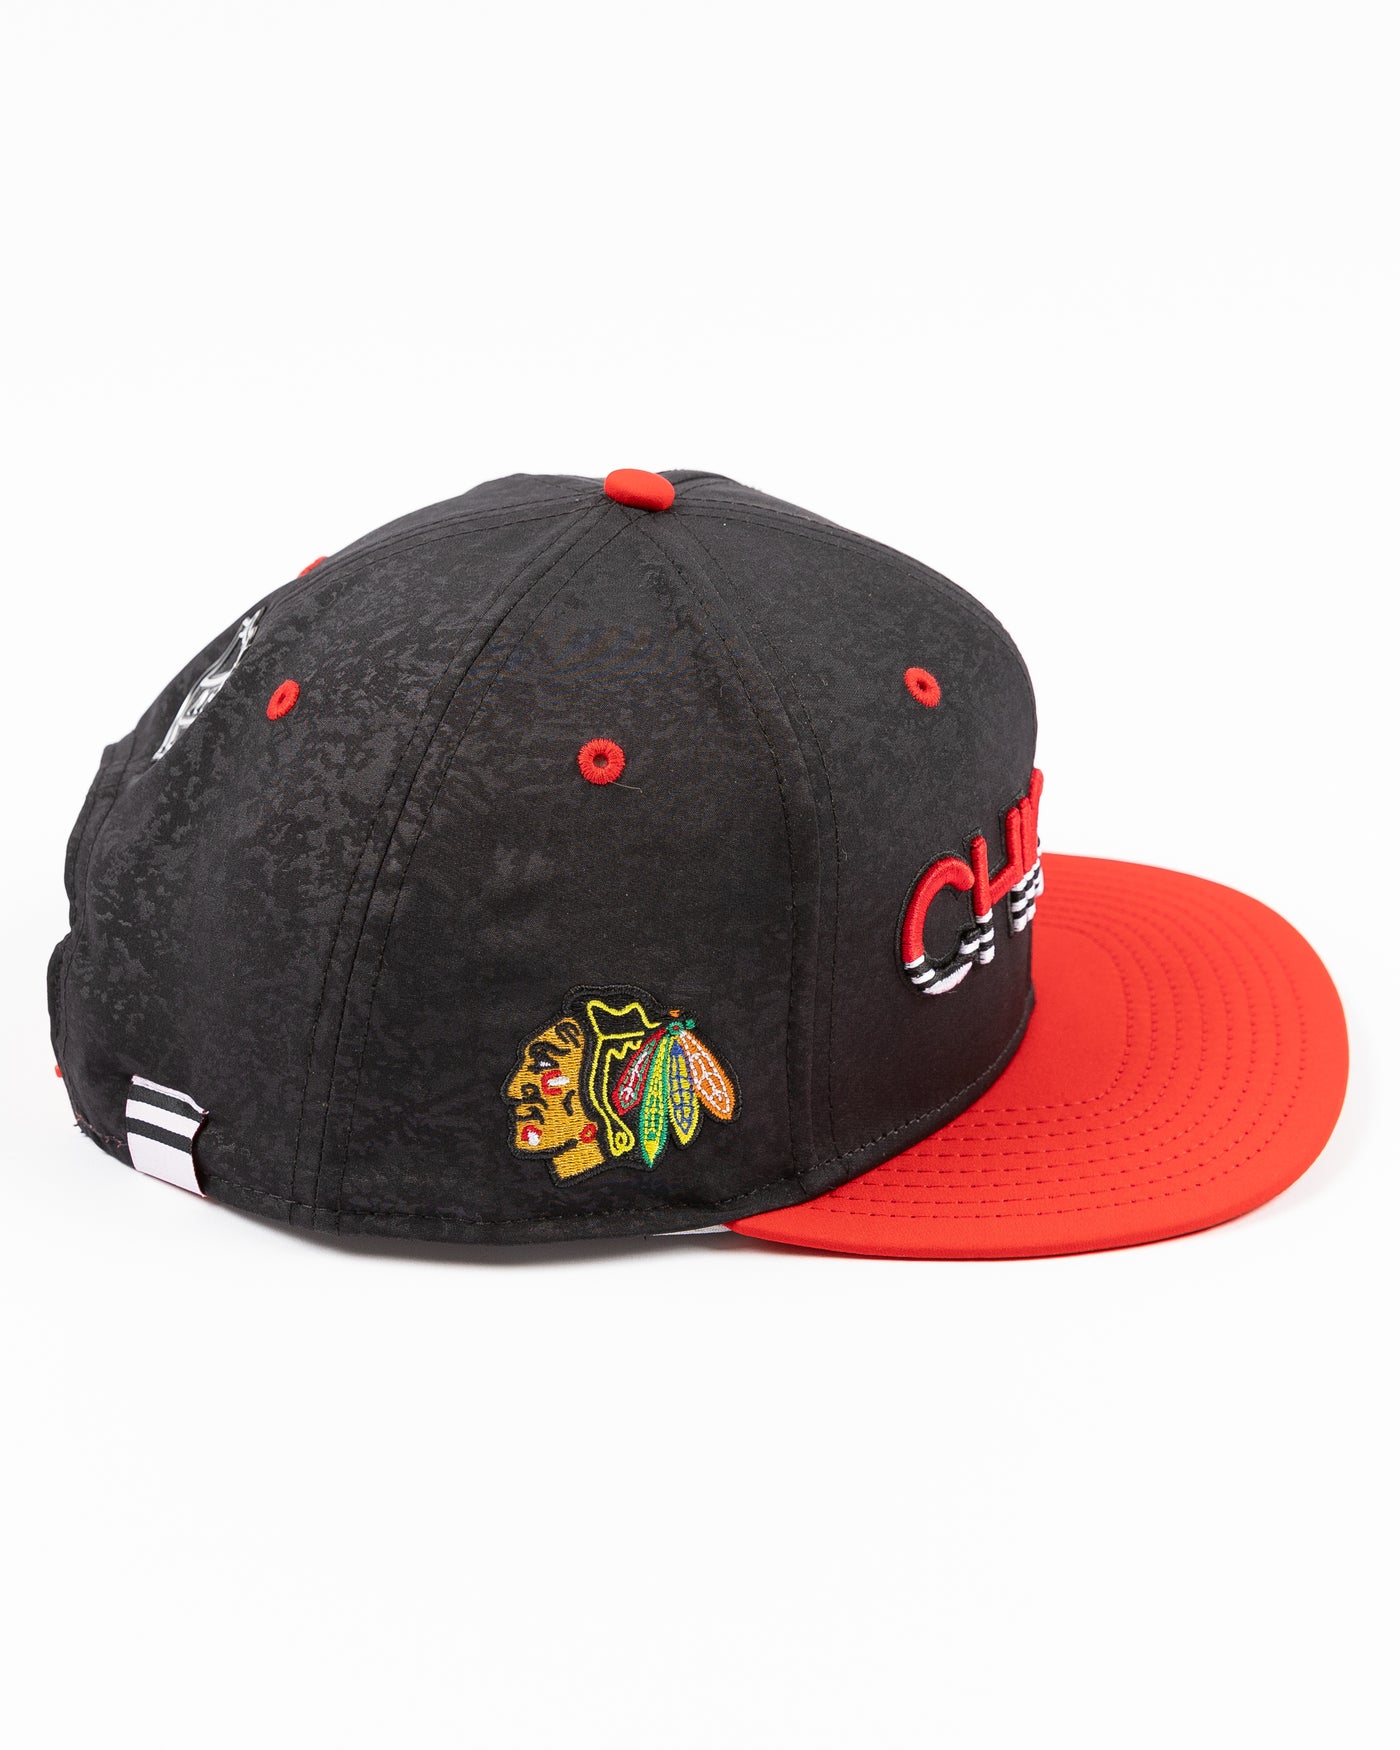 two tone black and red debossed Fanatics snapback cap with Chicago wordmark on front and Chicago Blackhawks primary logo embroidered on right side - right side lay flat